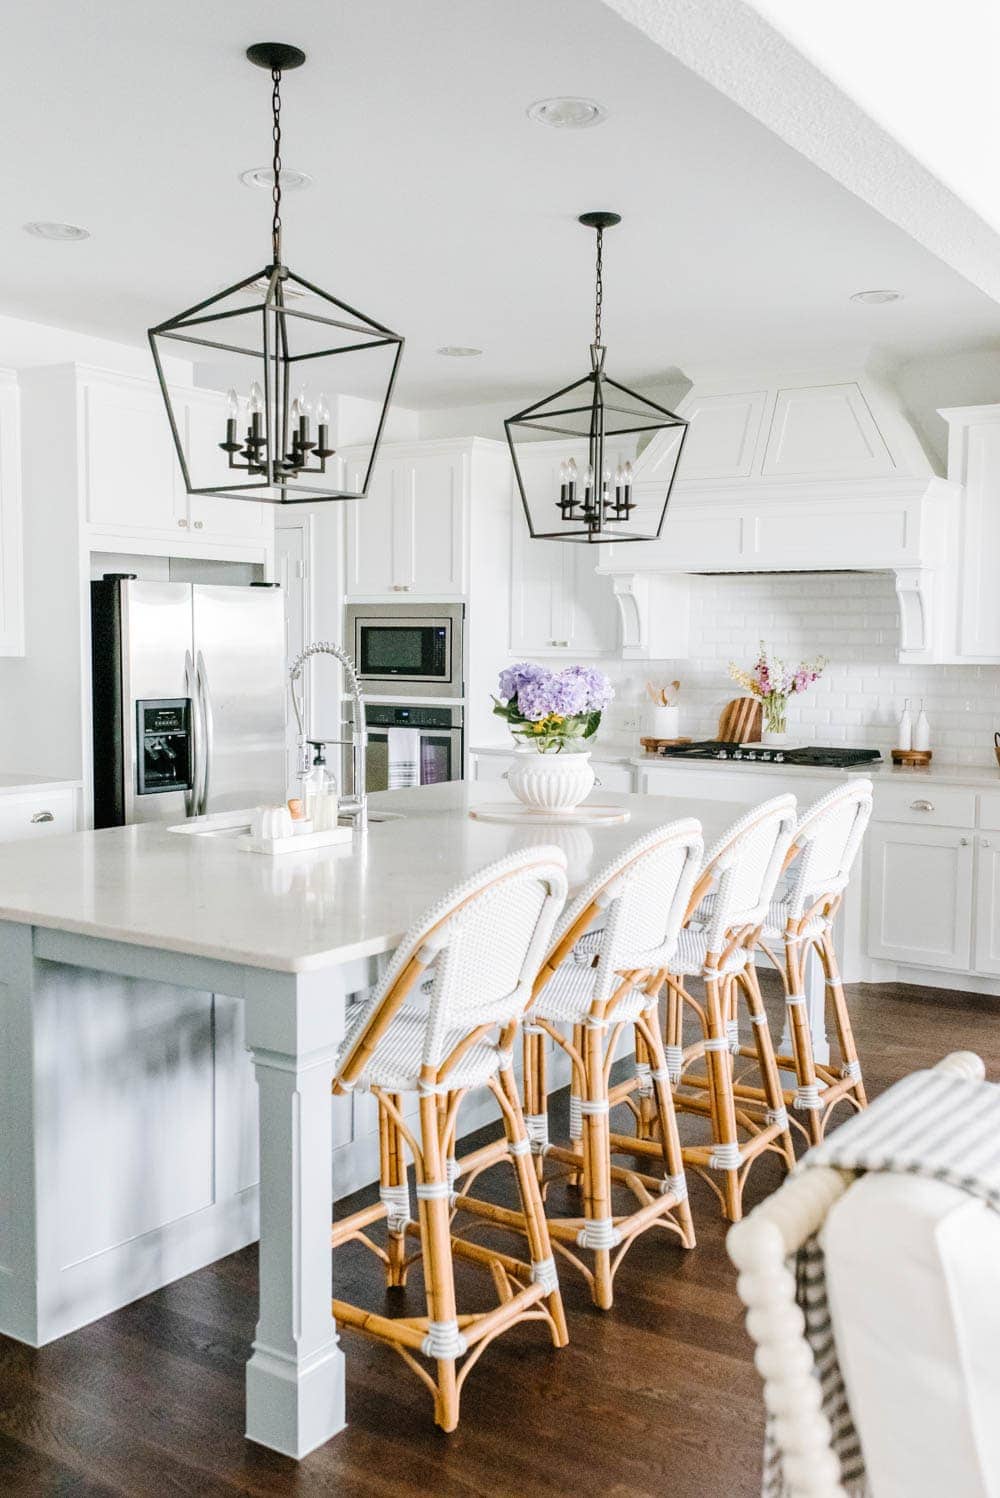 White kitchen cabinets with pale blue kitchen island, black pendant lanterns, and Serena and Lily rattan barstools.